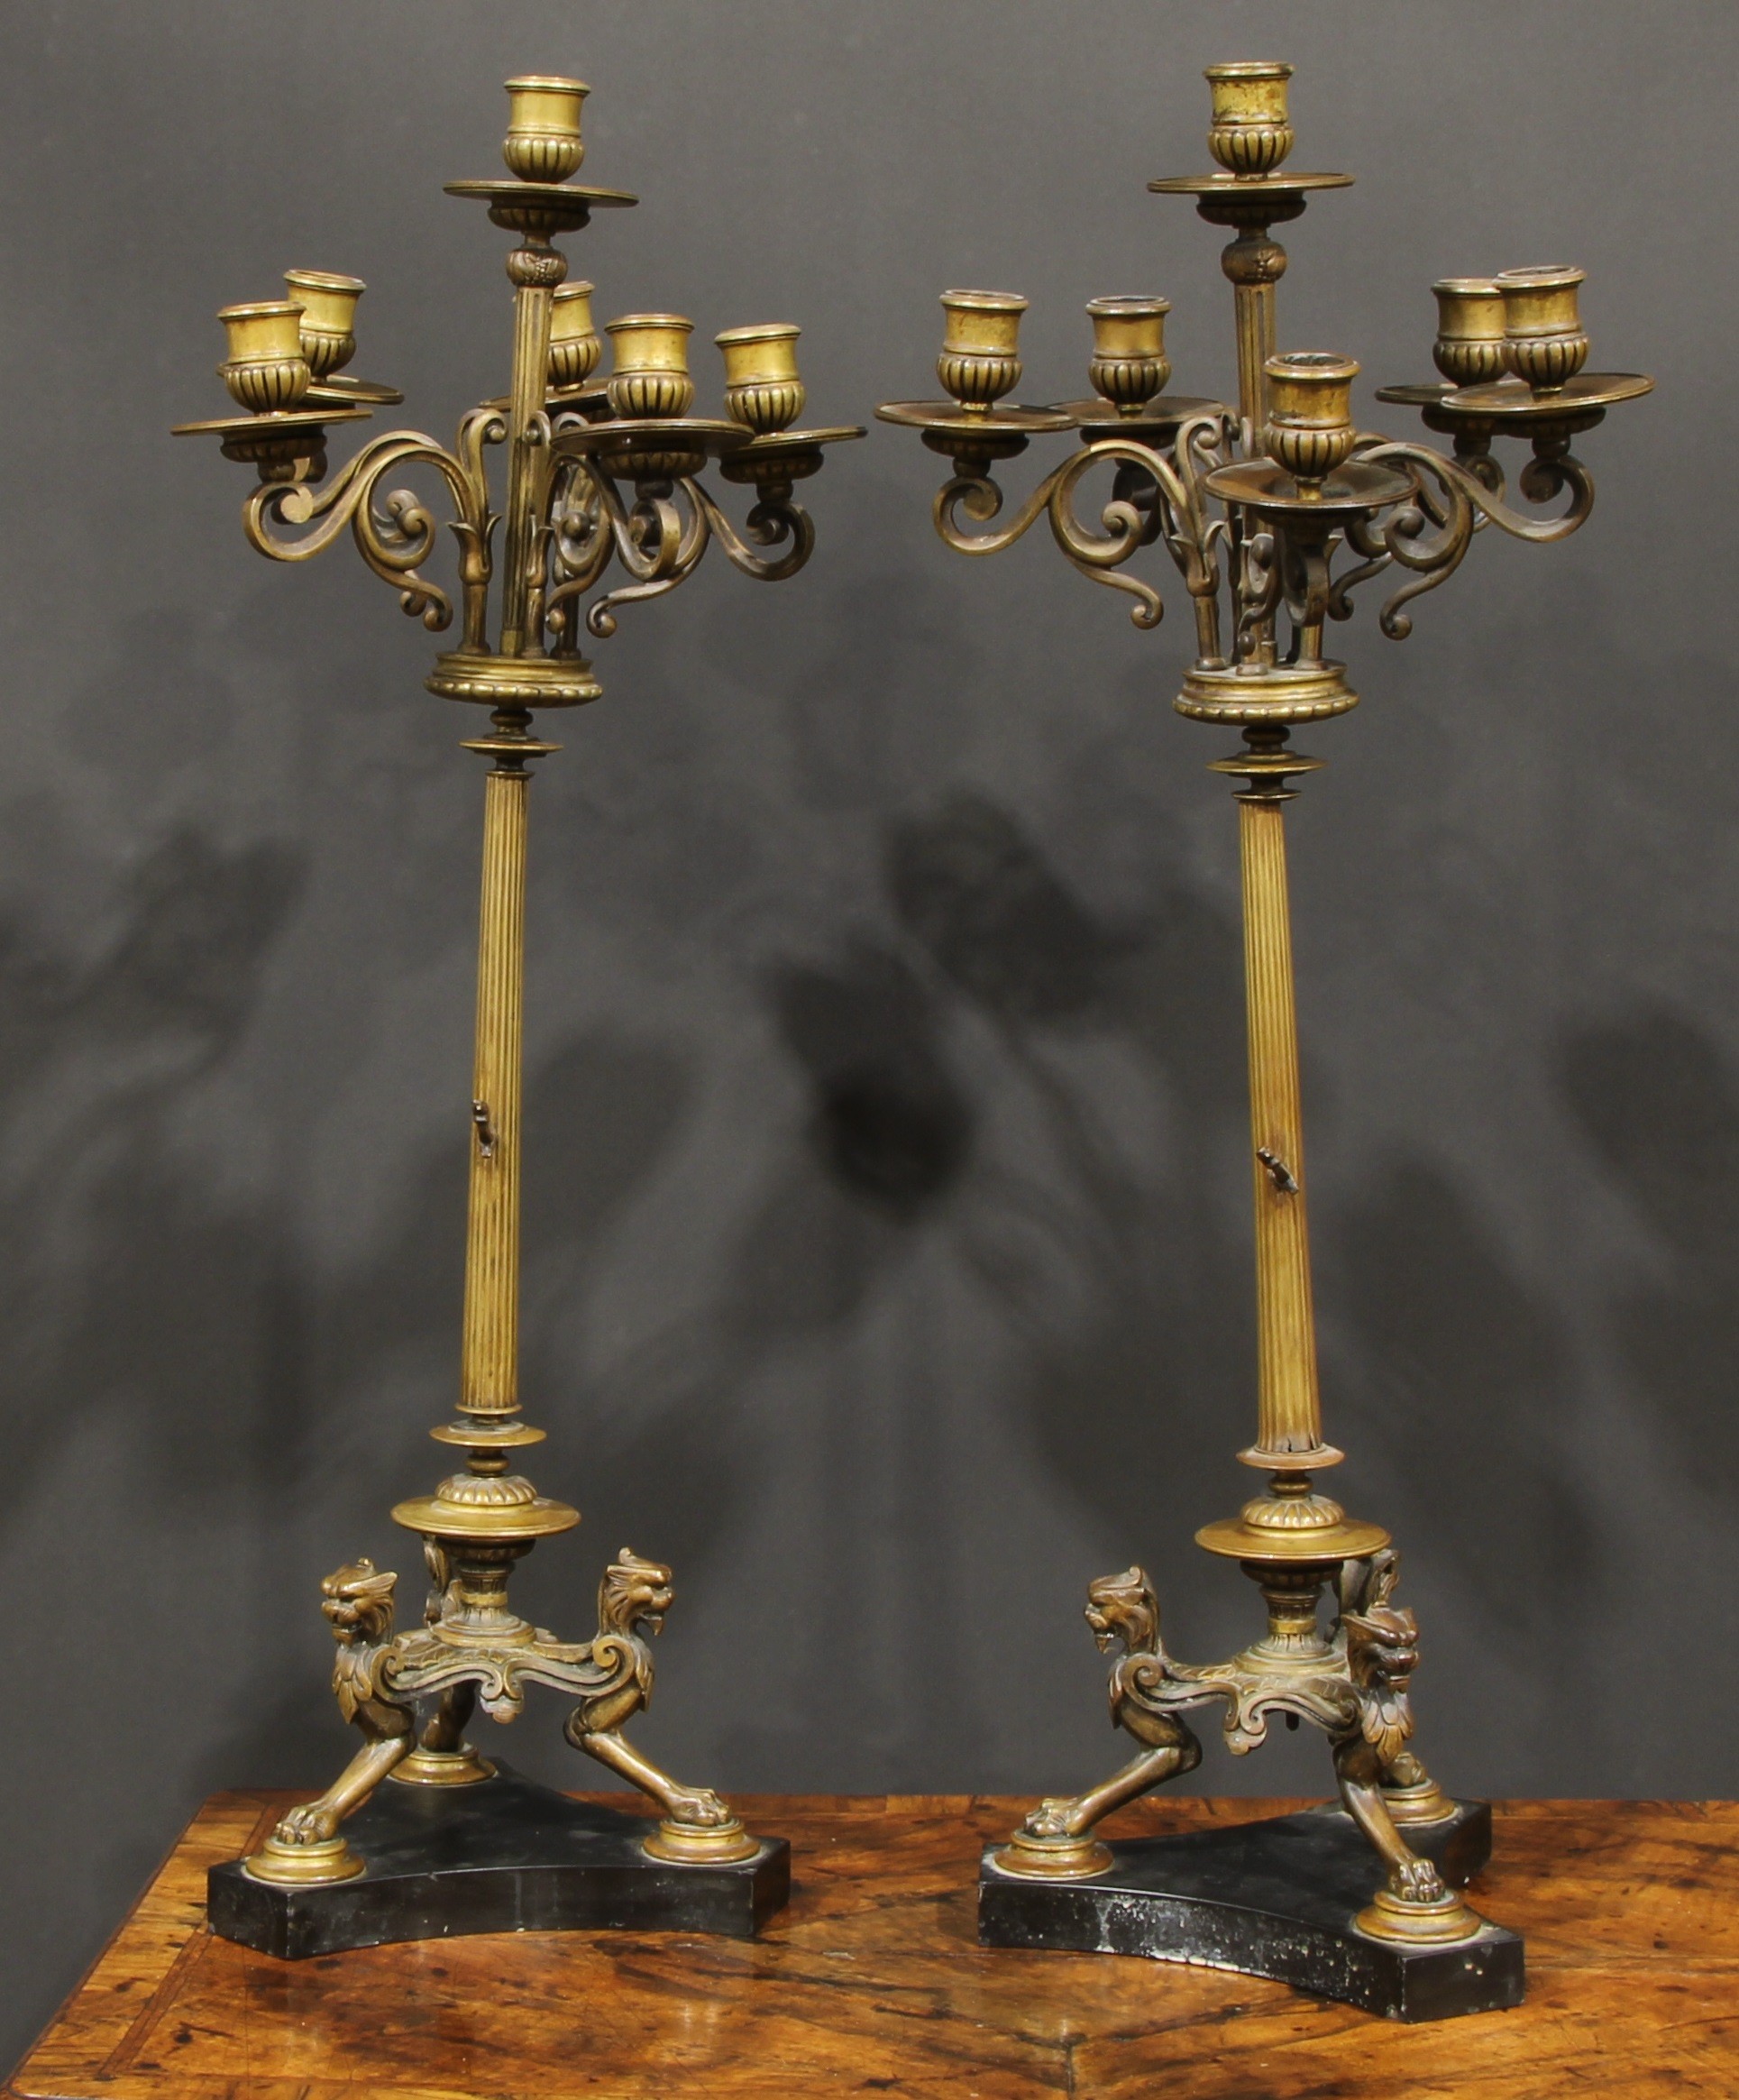 A pair of tall 19th century French bronze five-light candelabra, in the Grand Tour taste, half-